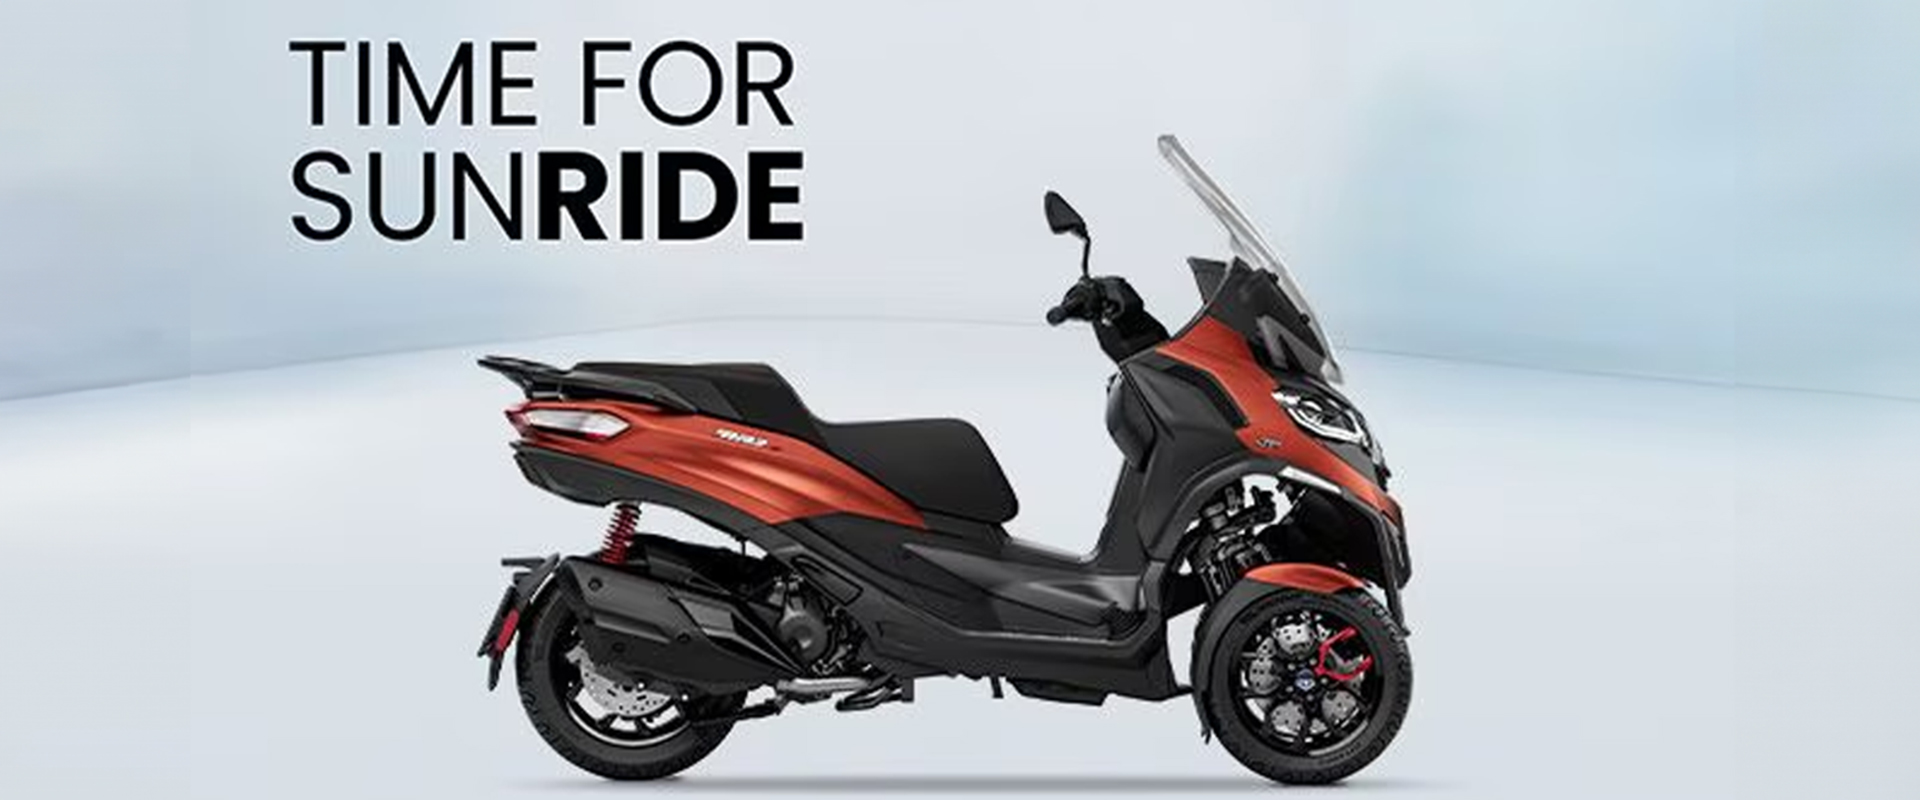 PIAGGIO MP3 FROM 129€/MONTH*￼����